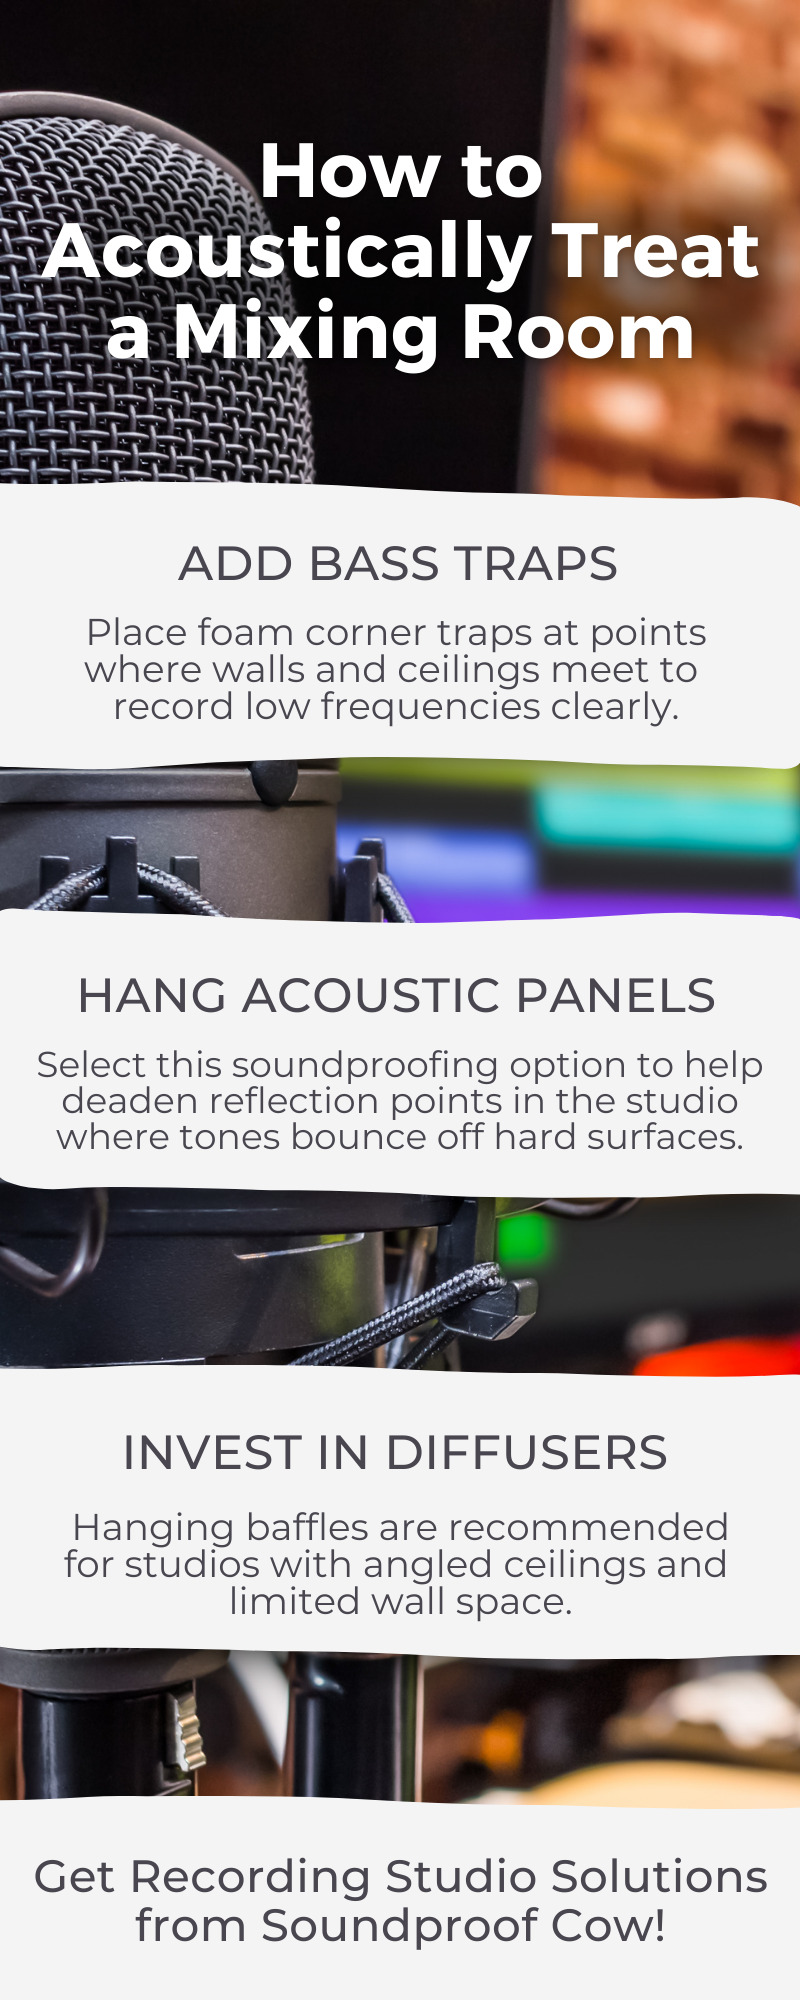 How to Acoustically Treat a Mixing Room